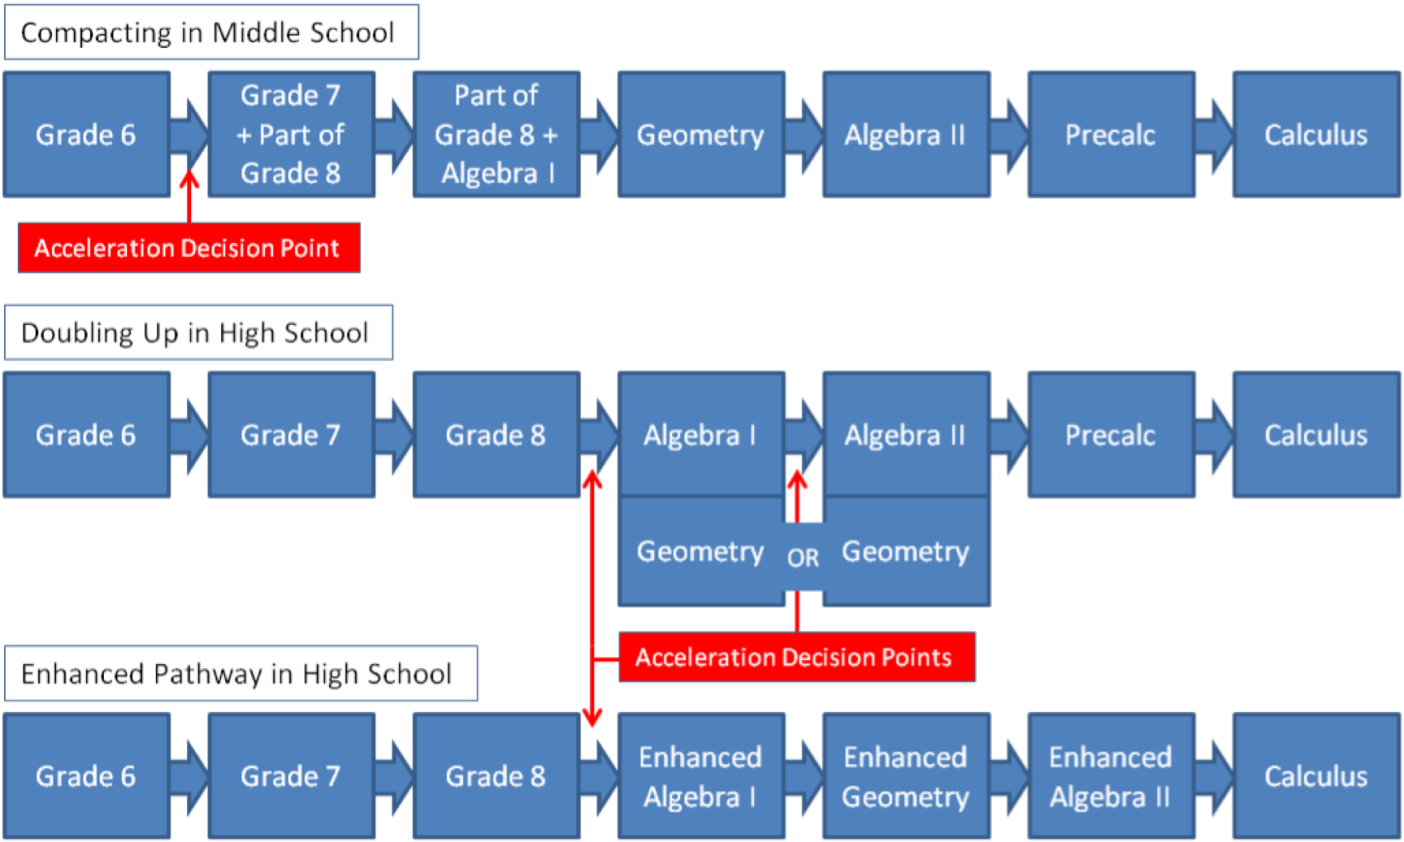 blue boxes showing the transition pathway from grade 6 to calculus. compating in middle school grade 6 (acceleration decision point) to grade 7 and part of grade 8 to grade 8 algebra i to geometry to algebra ii to precalc to calculus. doubling up in high school grade 6 to grade 7 to grade 8 (acceleration decision point)to algebra i and geometry to algebra ii and geometry to precalc to calculus. enhanced pathway in high school grade 6 to grade 7 to grade 8 (acceleration decision point)to enhanced algebra i to enhanced geometry to enhanced algebra ii to calculus. 